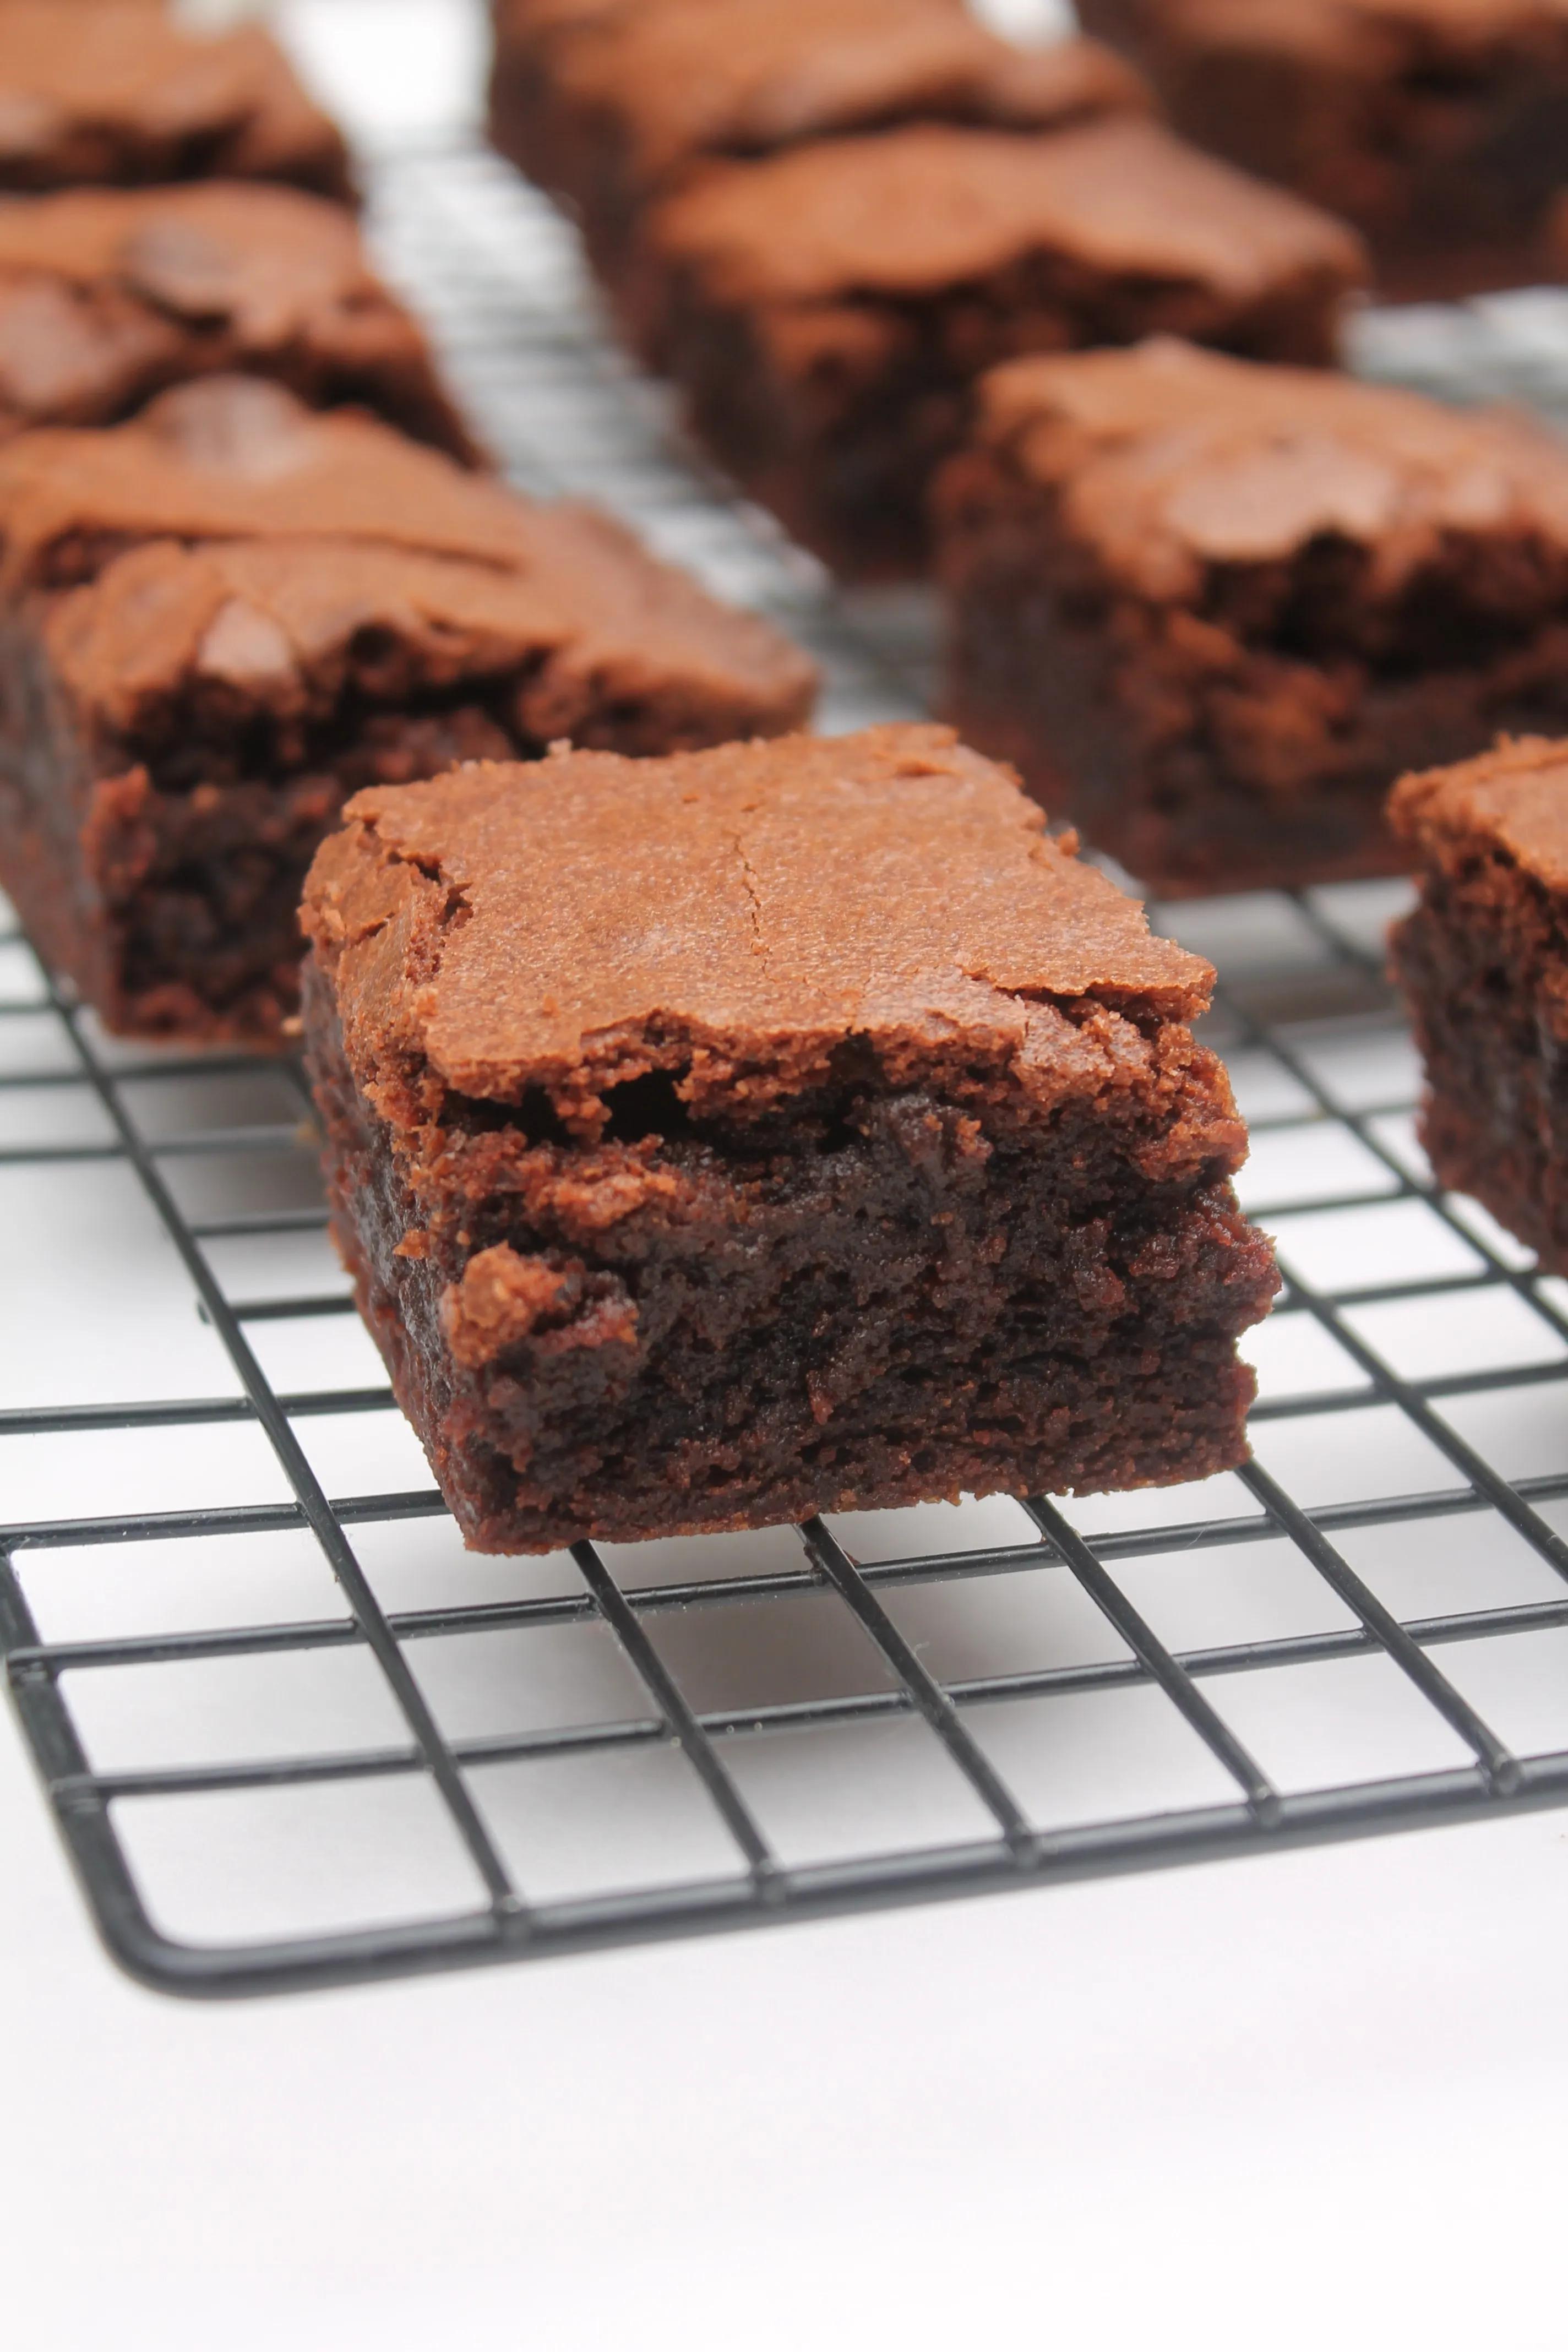 Homemade Brownies from Scratch | I Heart Recipes